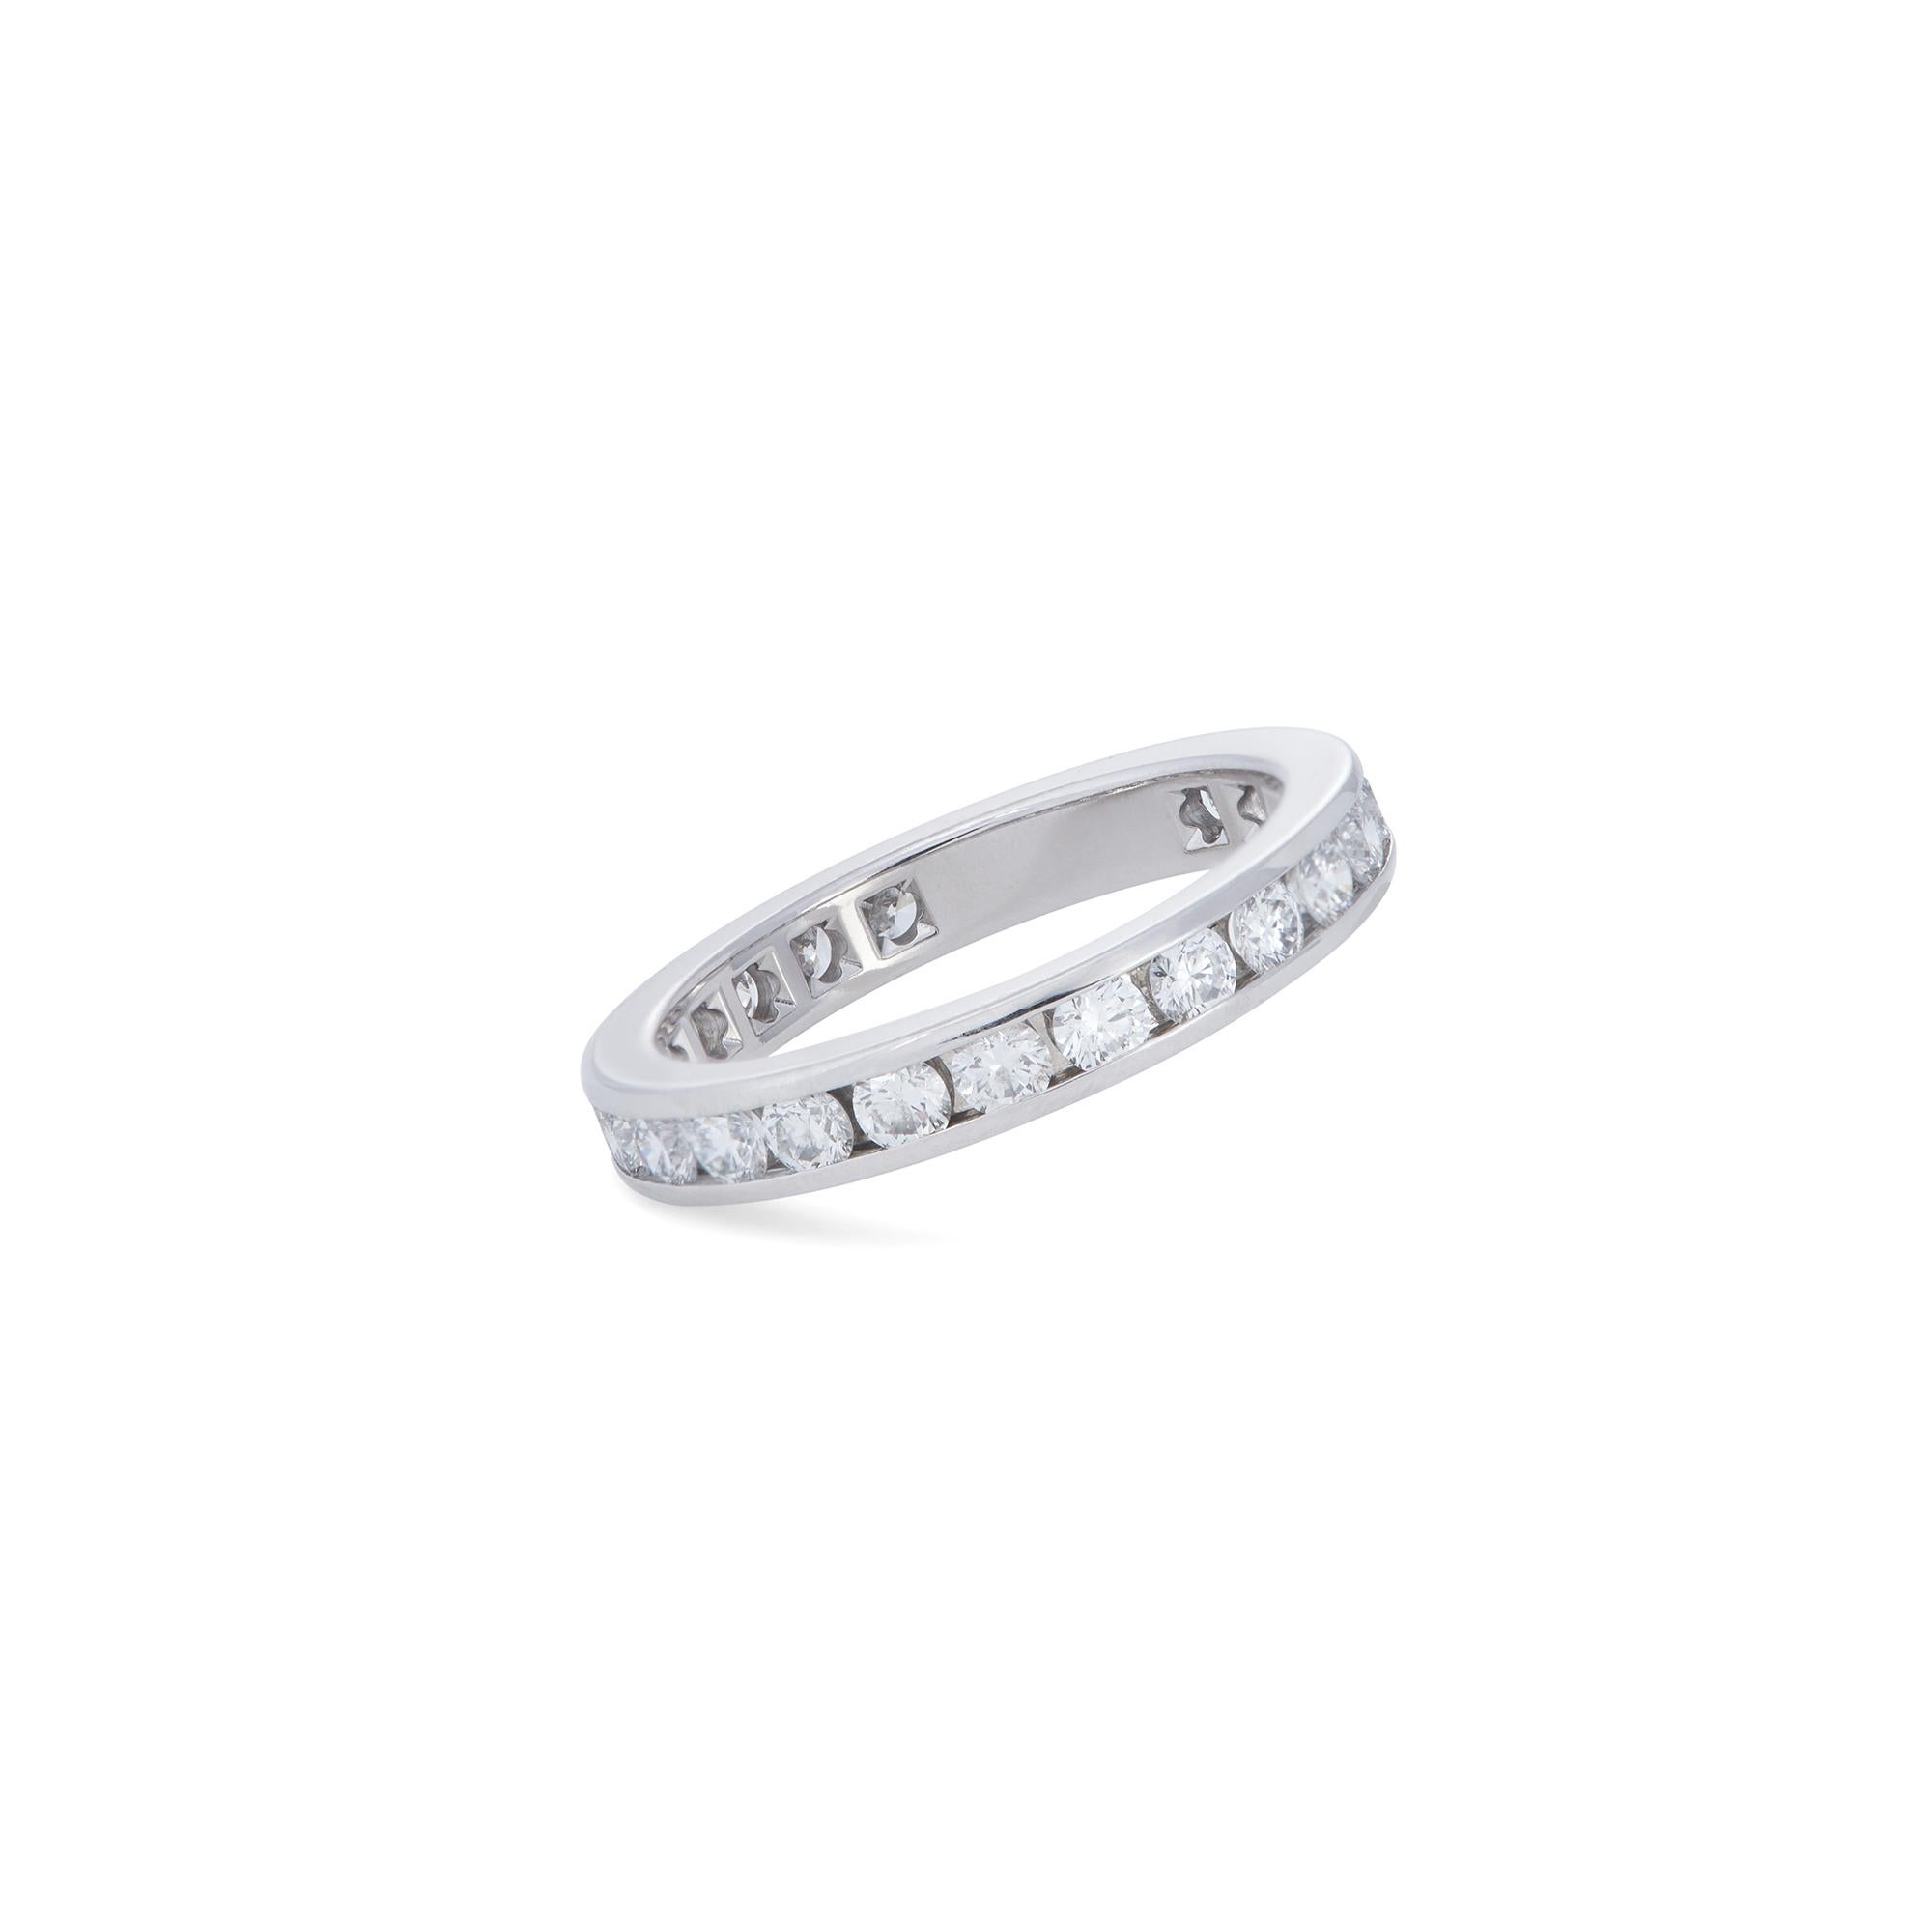 Authentic Tiffany & Co. Tiffany Setting wedding band crafted in platinum.  The channel set eternity band features 24 gorgeous round brilliant cut diamonds of an estimated 0.85 carats total weight and measures 3mm in width.  Size 4 1/2.  Signed